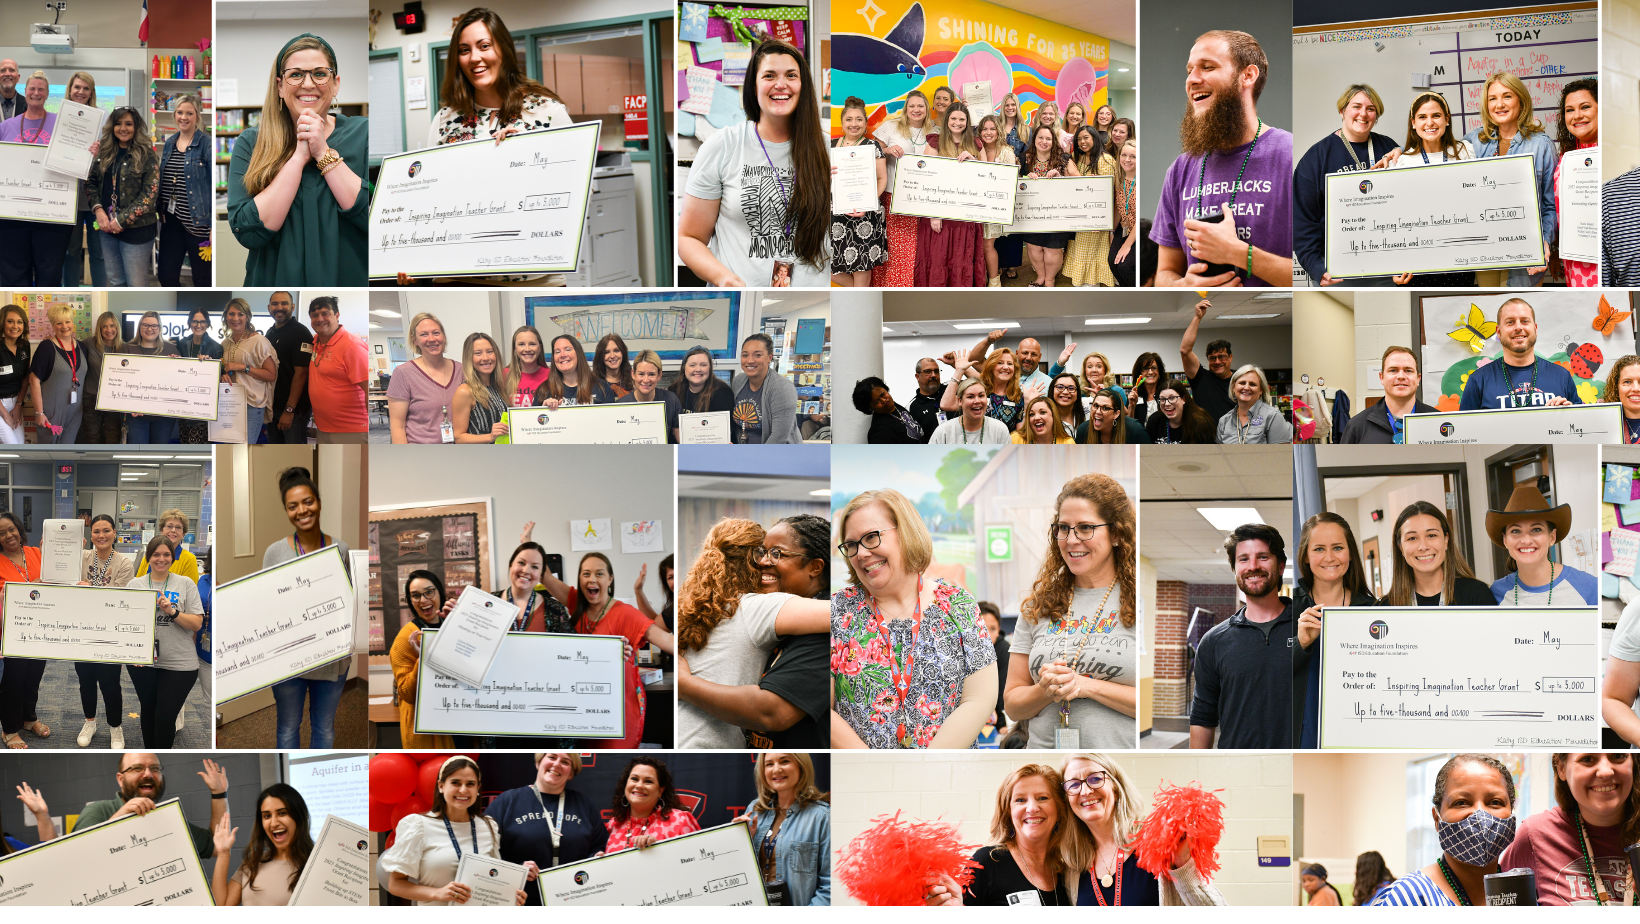 https://myneighborhoodnews.com/uploads/images/News/May_2023/katy_isd_partners_in_edu_Grant_Collage.png